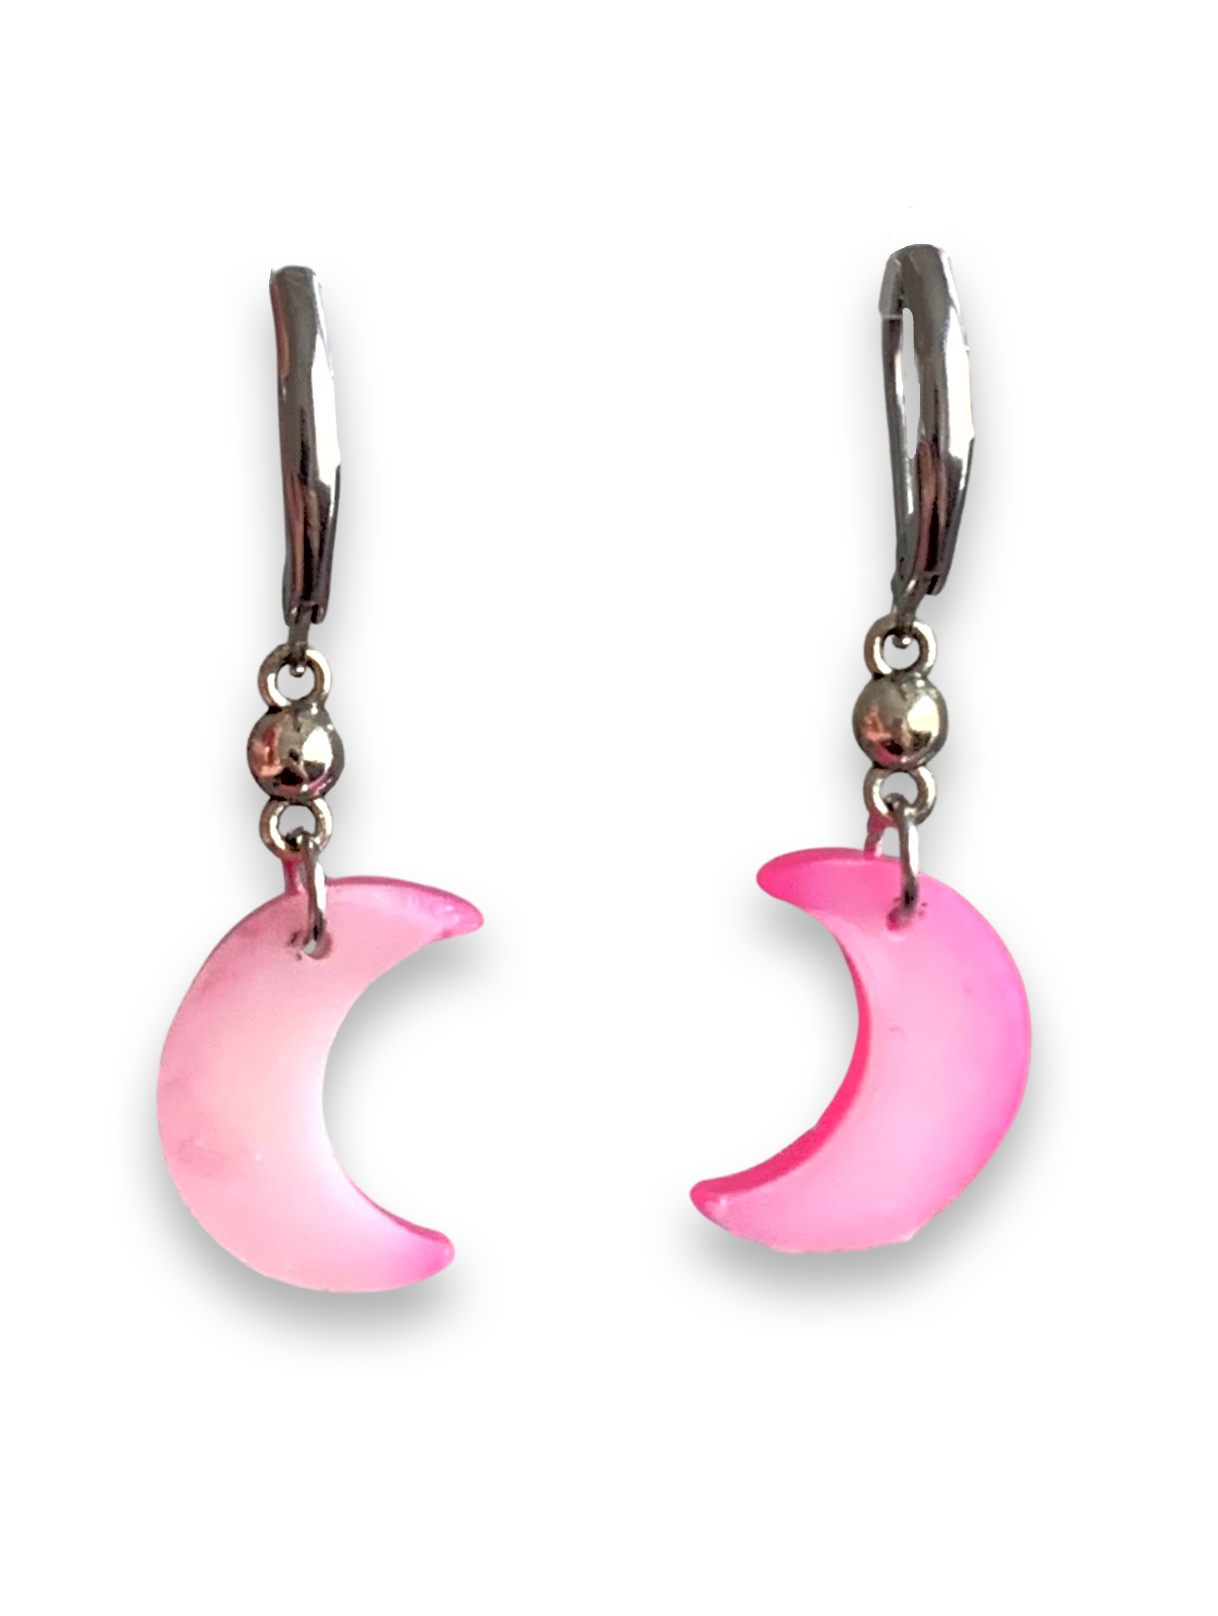 Tiny Hot Pink Crescent Moon Earrings on Stainless Steel Clasp Earrings